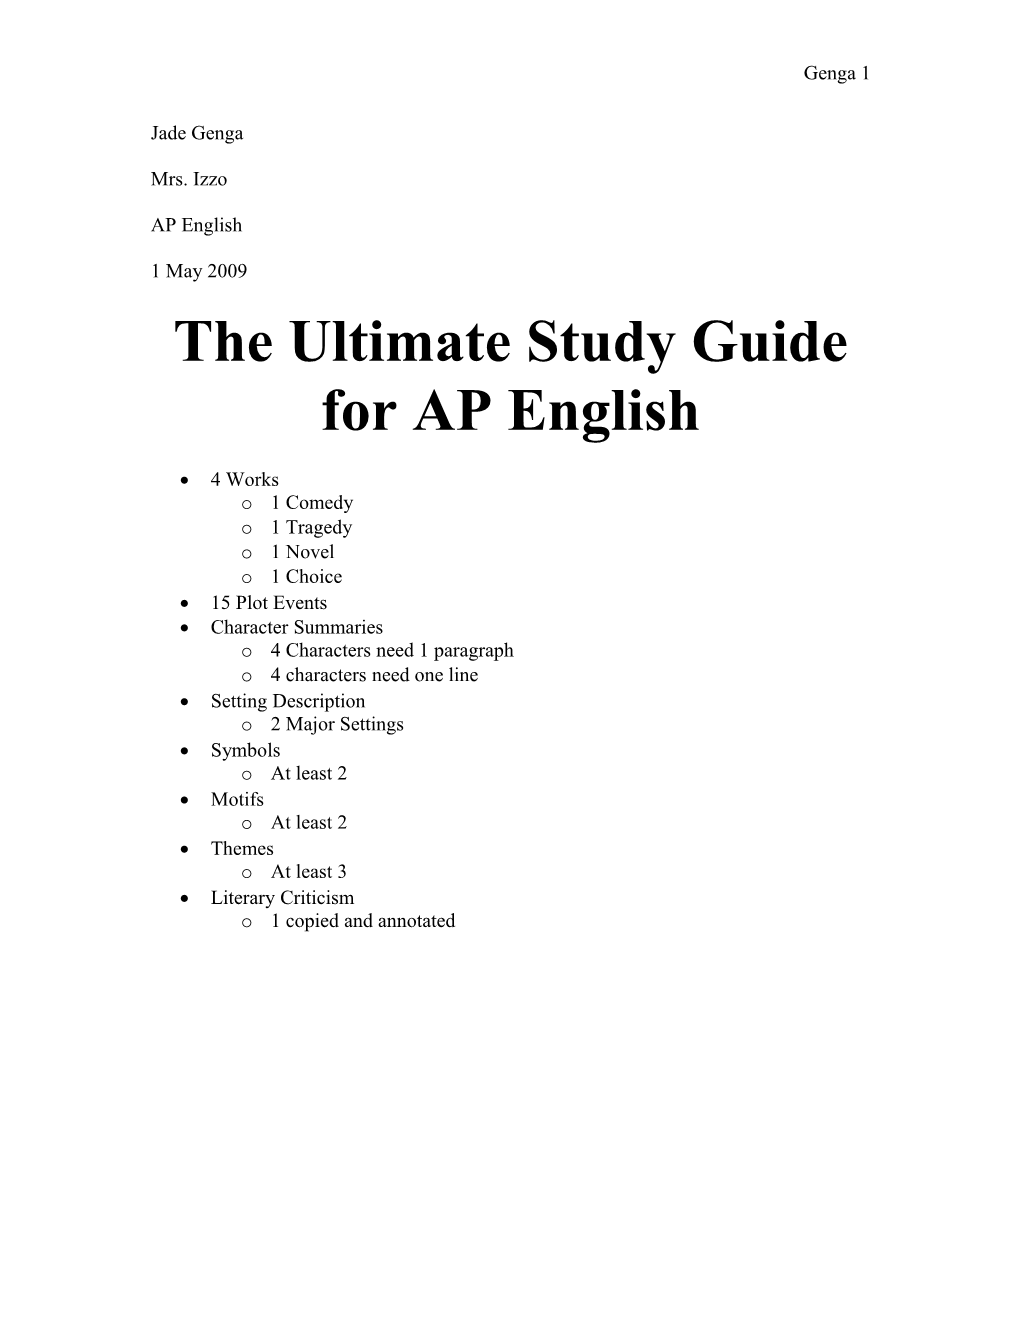 Rubric for English Study Guide